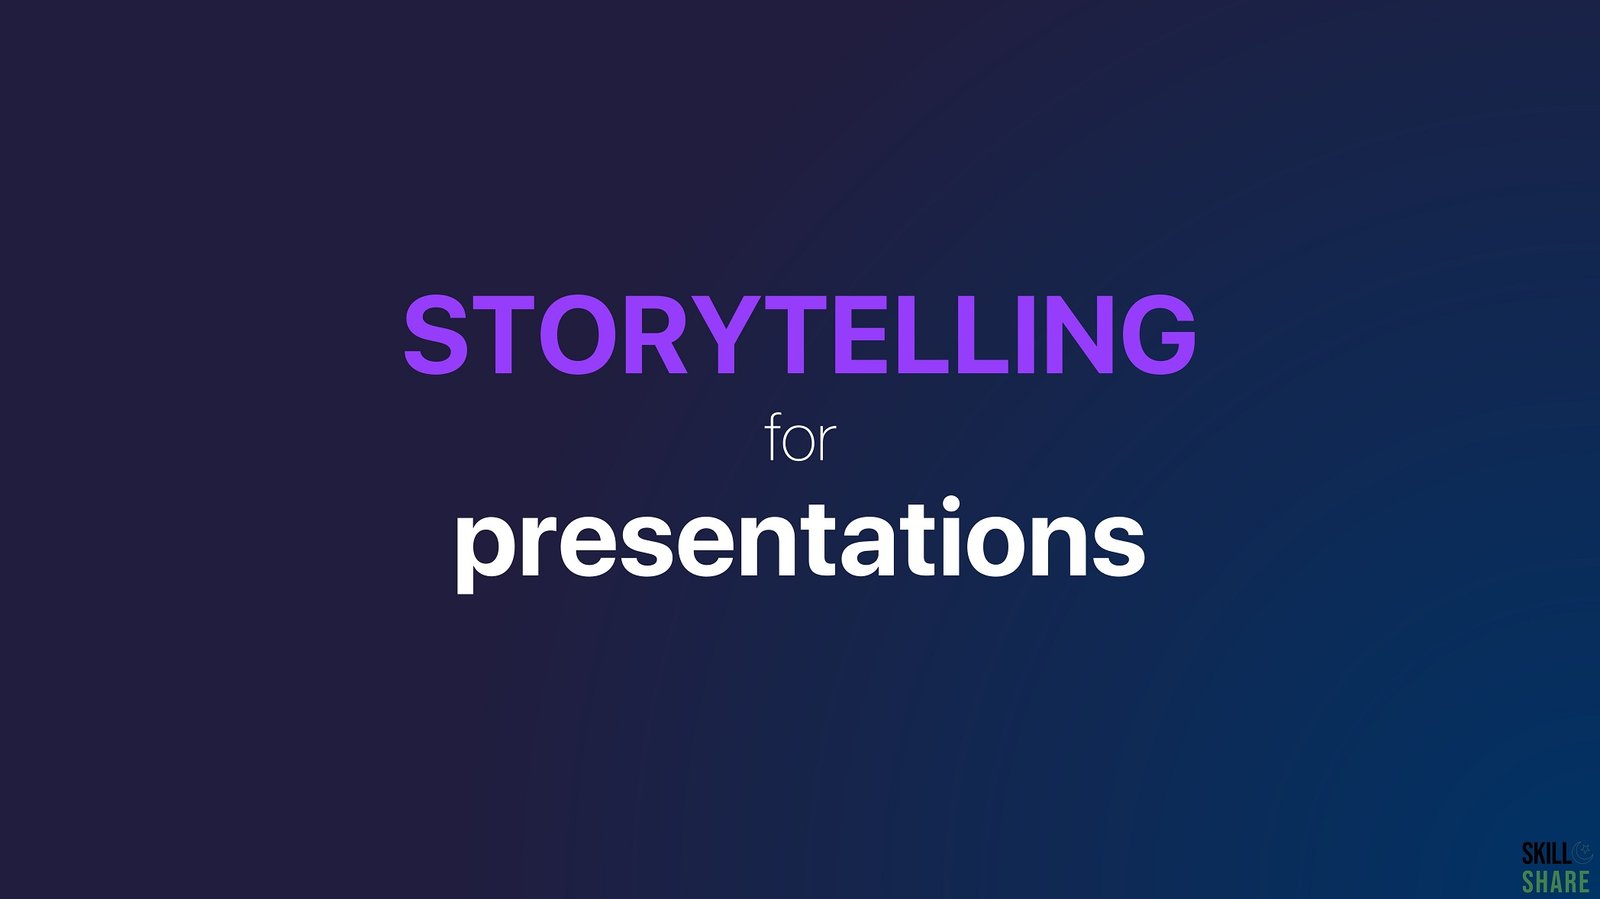 Presentation Storytelling Techniques to Create Powerful and Memorable Slide Presentations